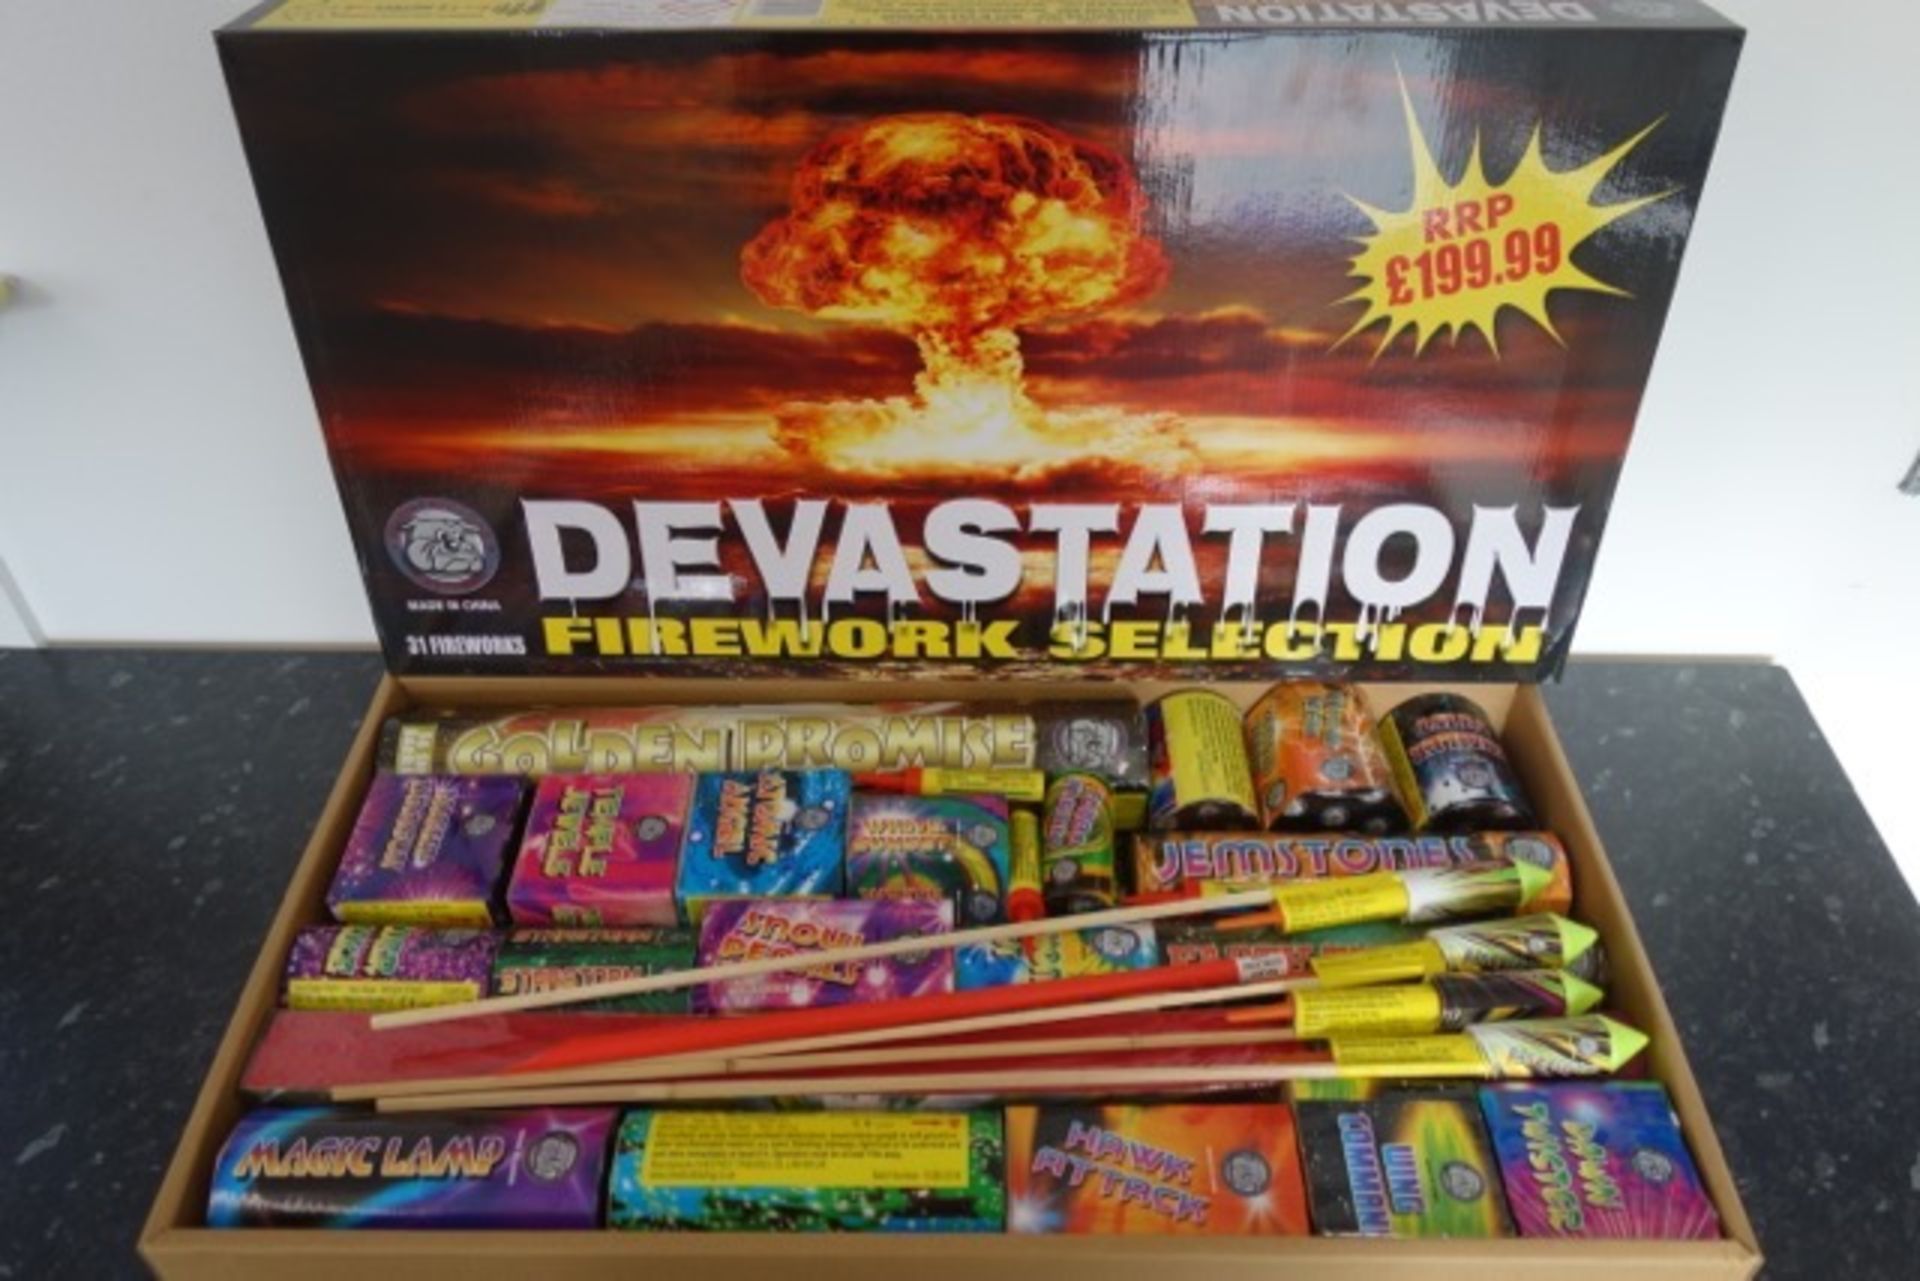 Mixed Firework Lot - Total of 89 Fireworks! Includes: 1 x Devastation 31 Piece Selection Box. RRP £